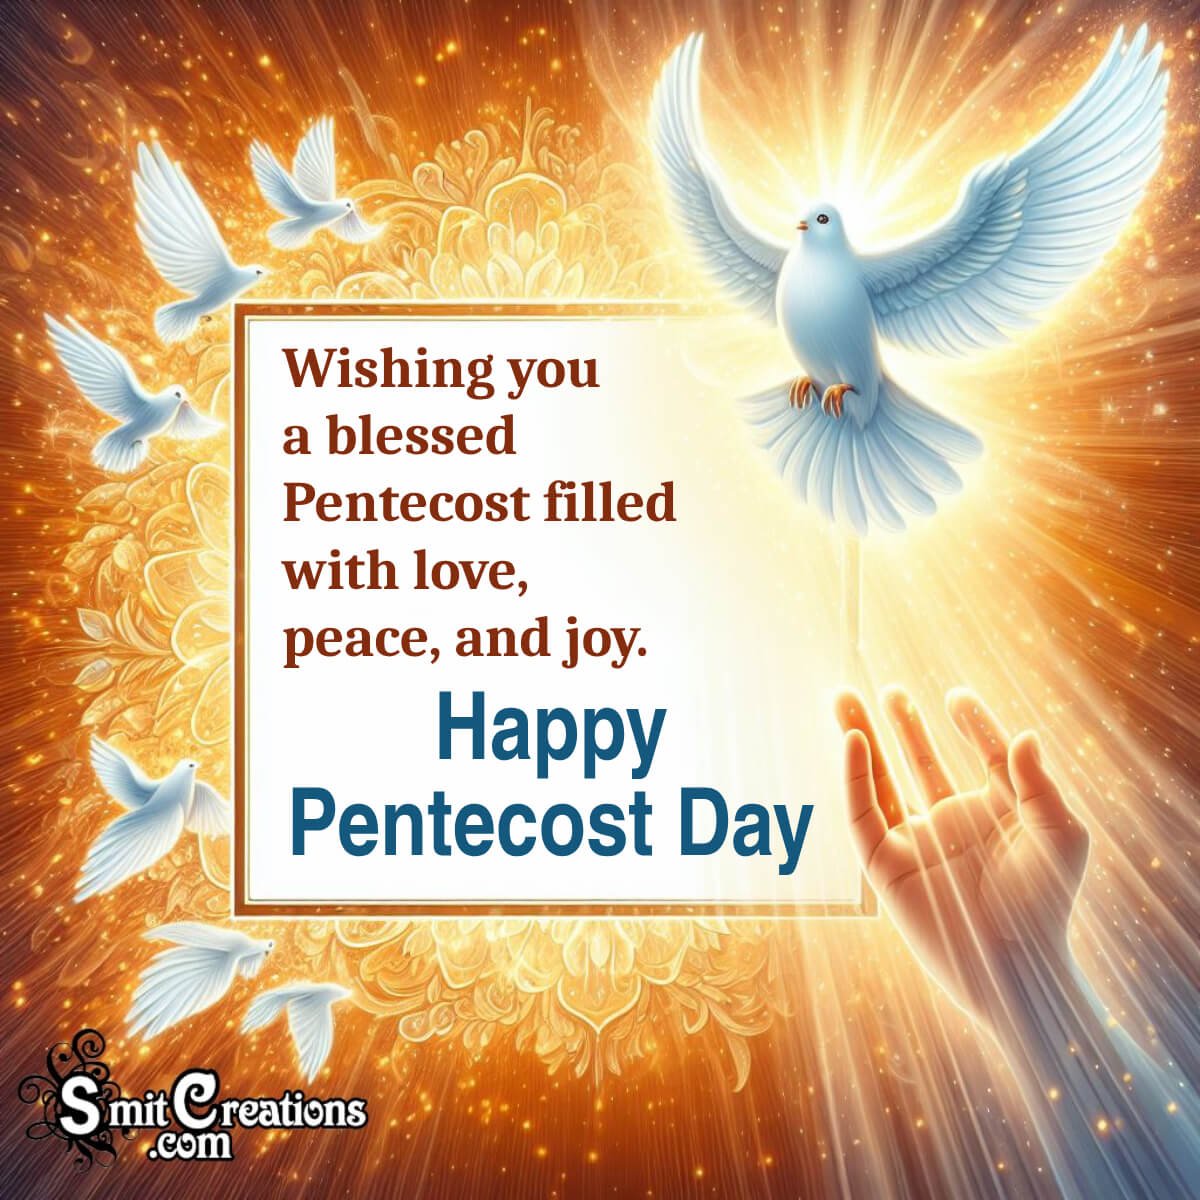 Happy Pentecost Day Wishing Picture